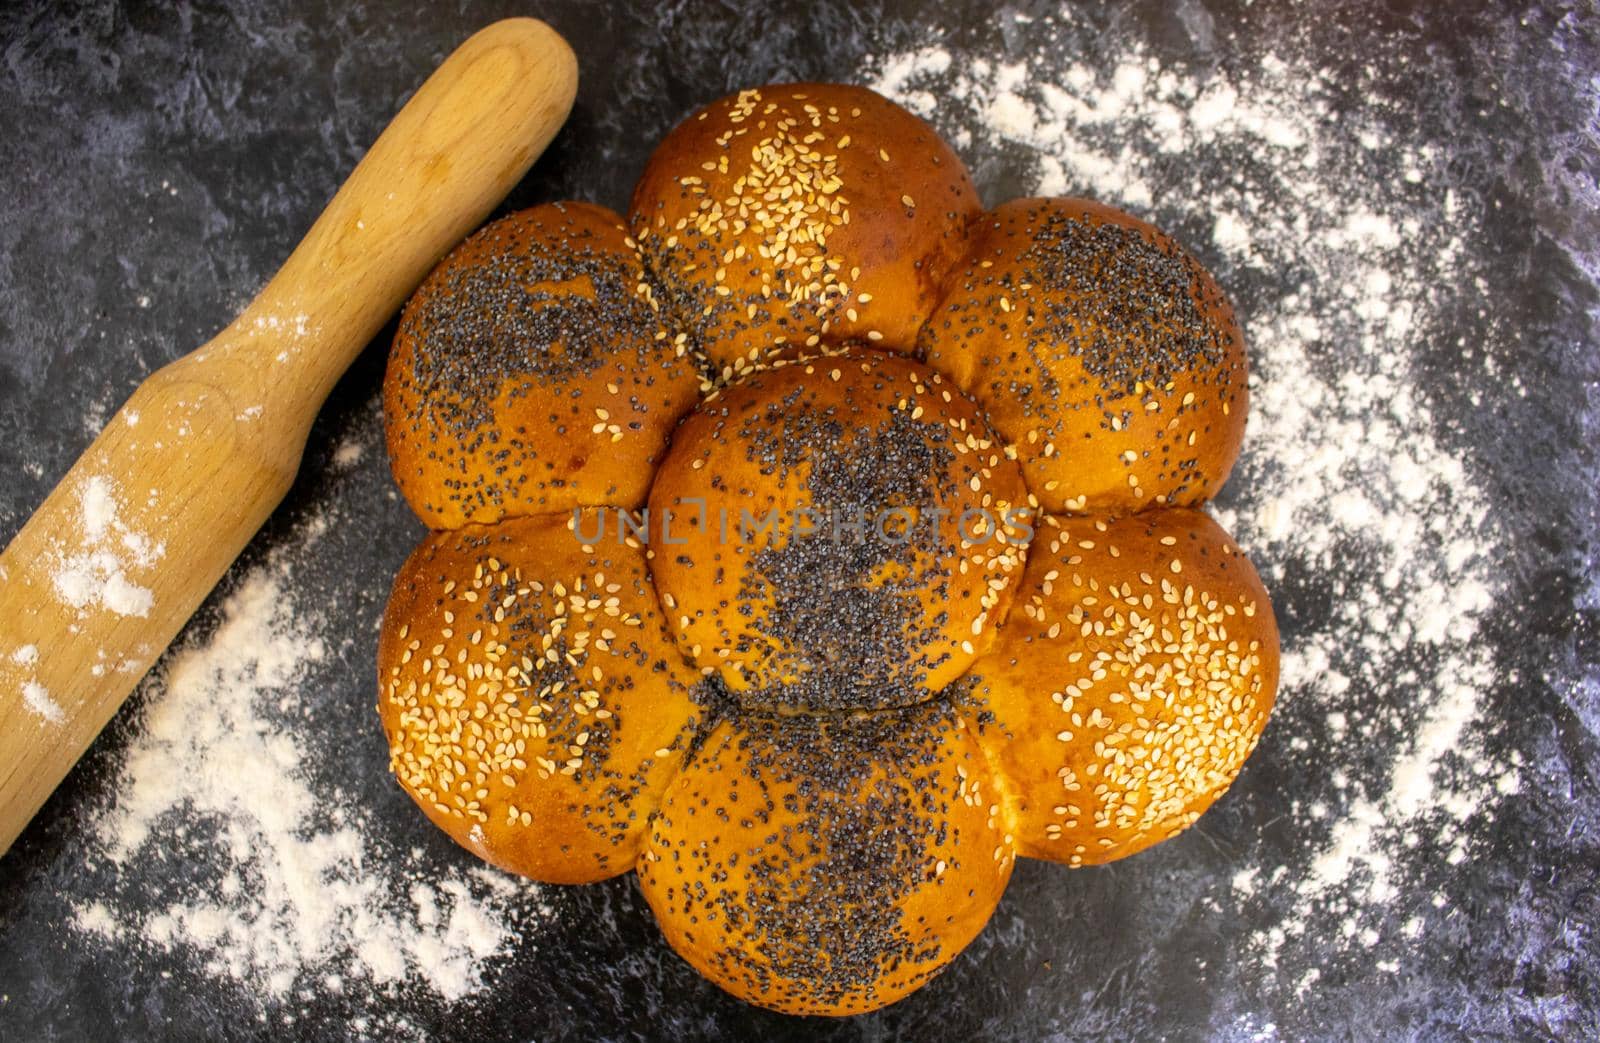 A freshly baked bread with poppy seeds and sesame seeds is on the dark table.